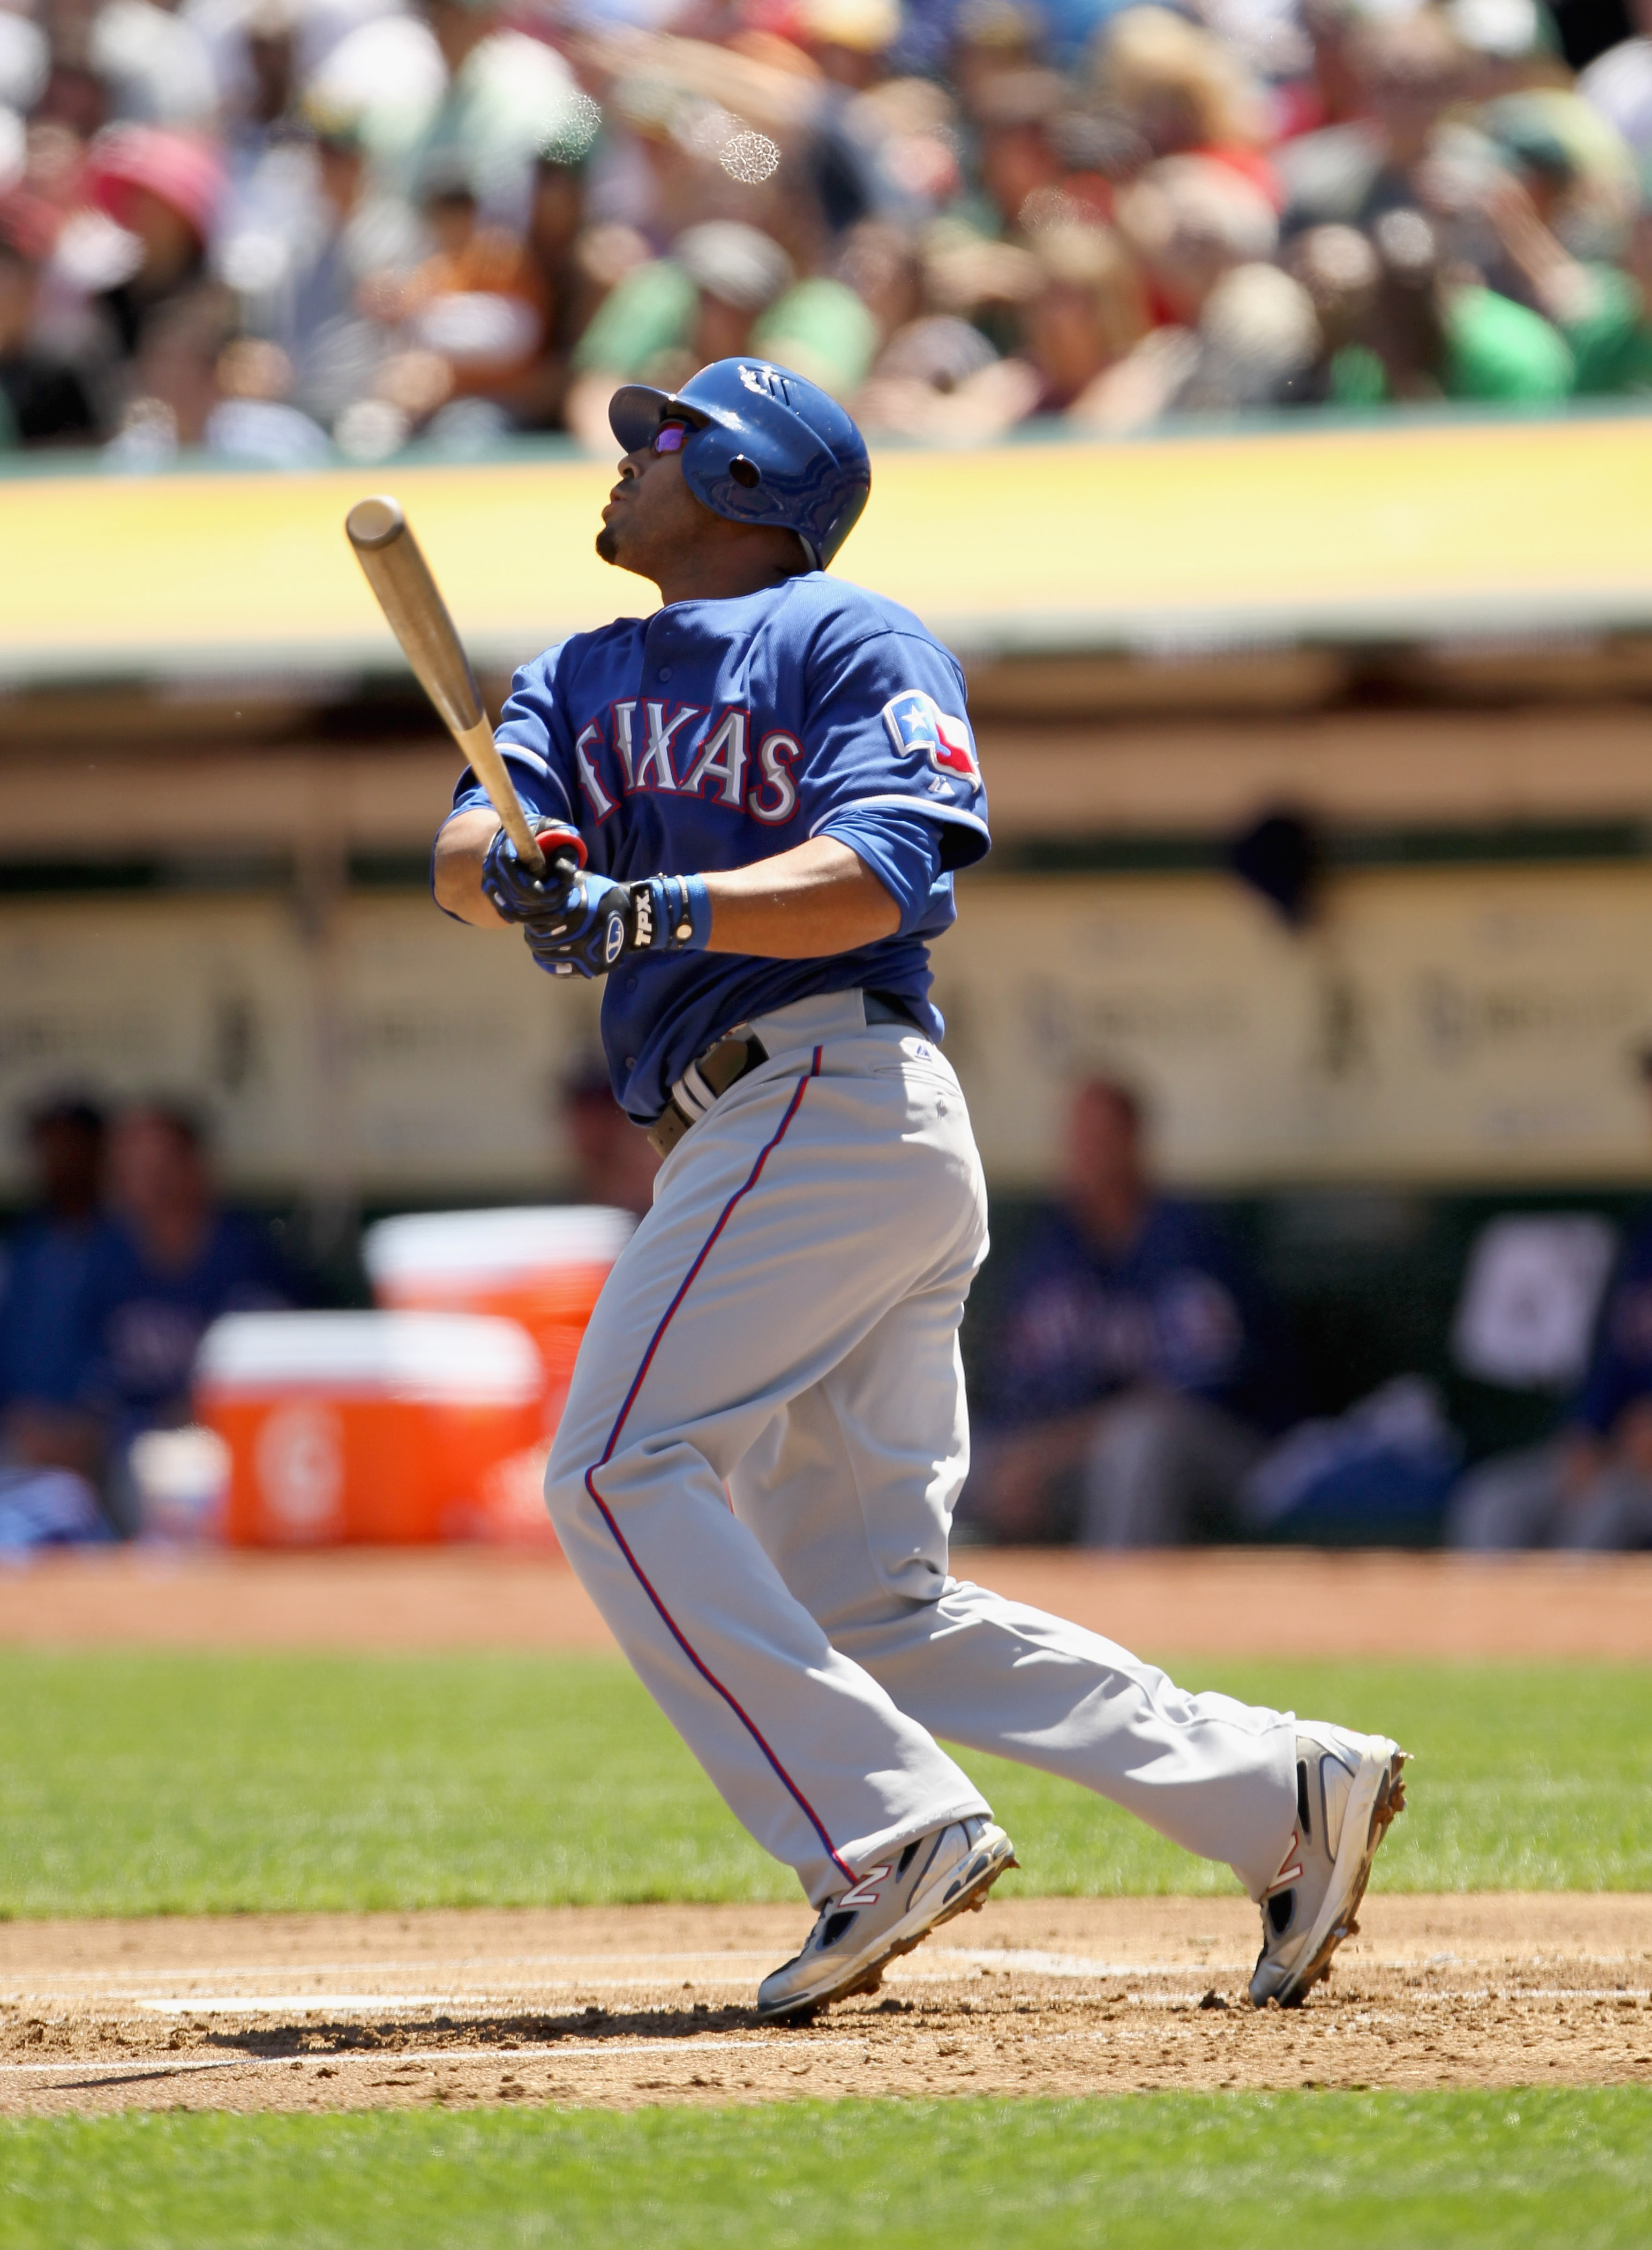 Without Nelson Cruz, the Rangers are free-falling in these rankings.